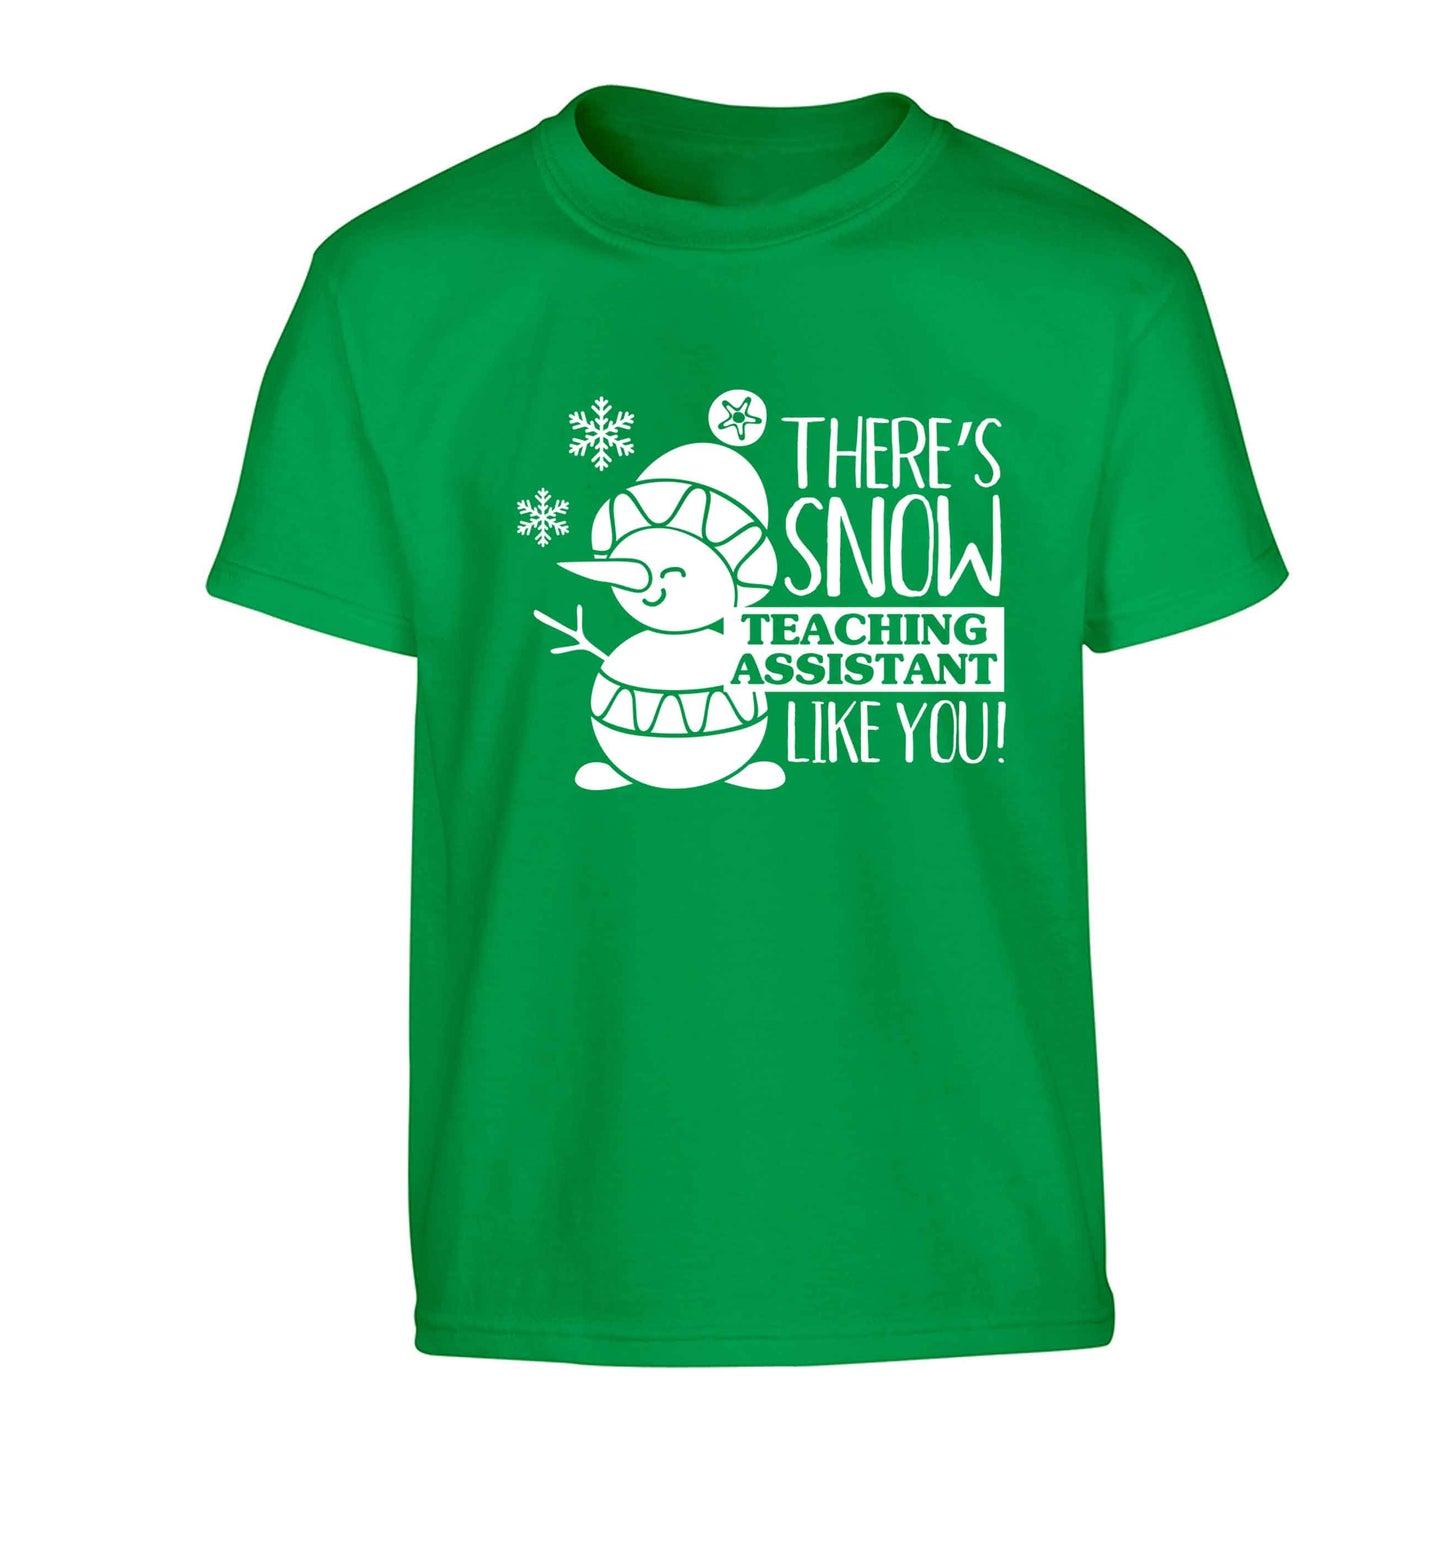 There's snow teaching assistant like you Children's green Tshirt 12-13 Years